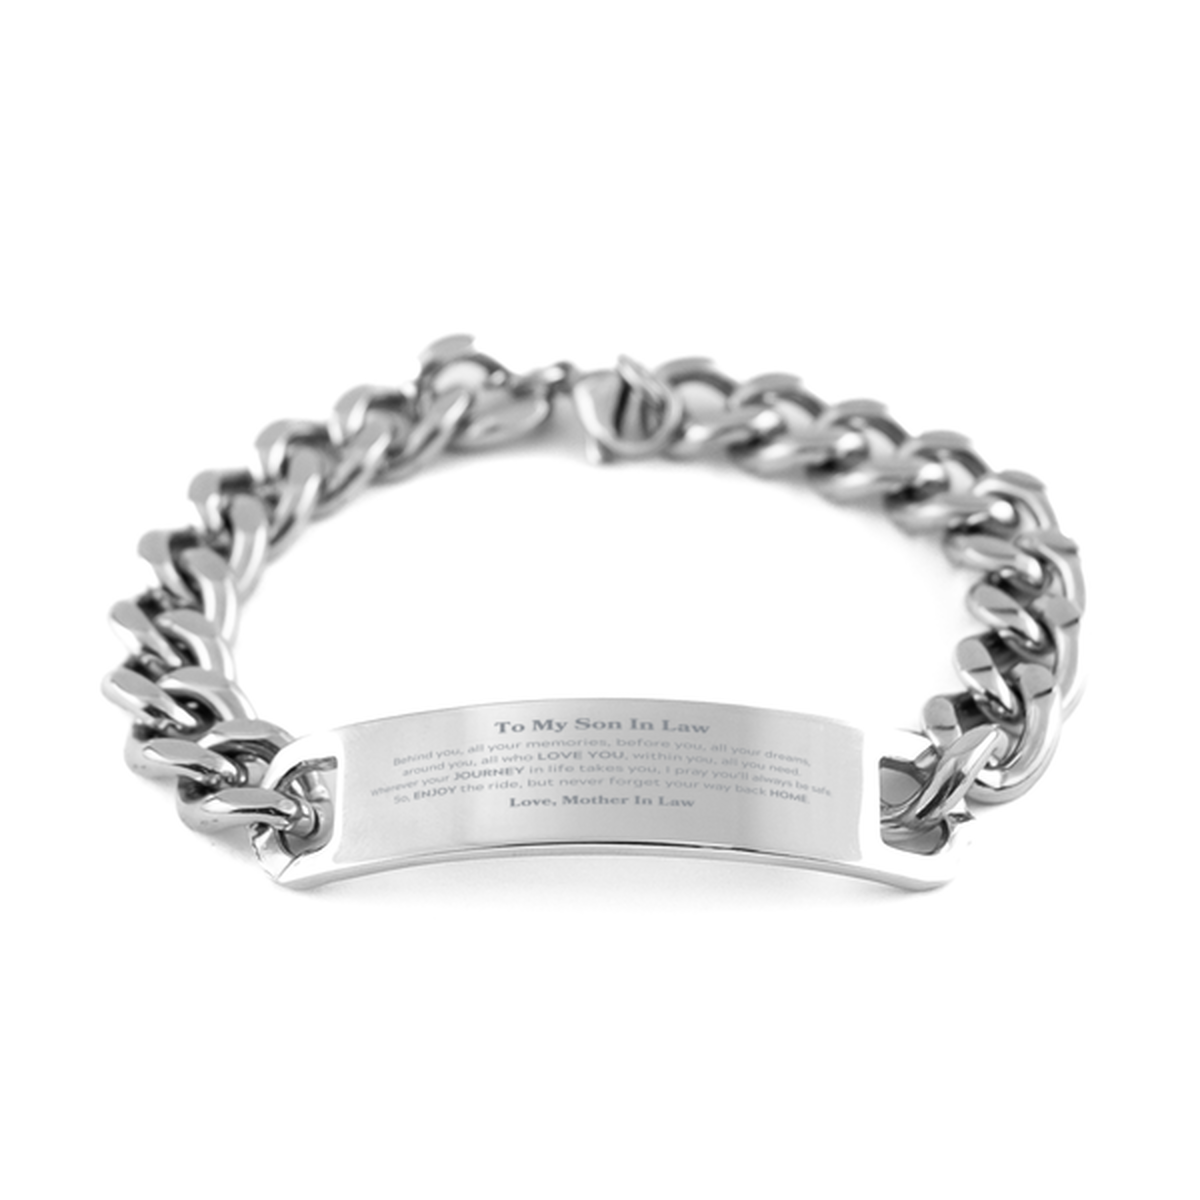 To My Son In Law Graduation Gifts from Mother In Law, Son In Law Cuban Chain Stainless Steel Bracelet Christmas Birthday Gifts for Son In Law Behind you, all your memories, before you, all your dreams. Love, Mother In Law